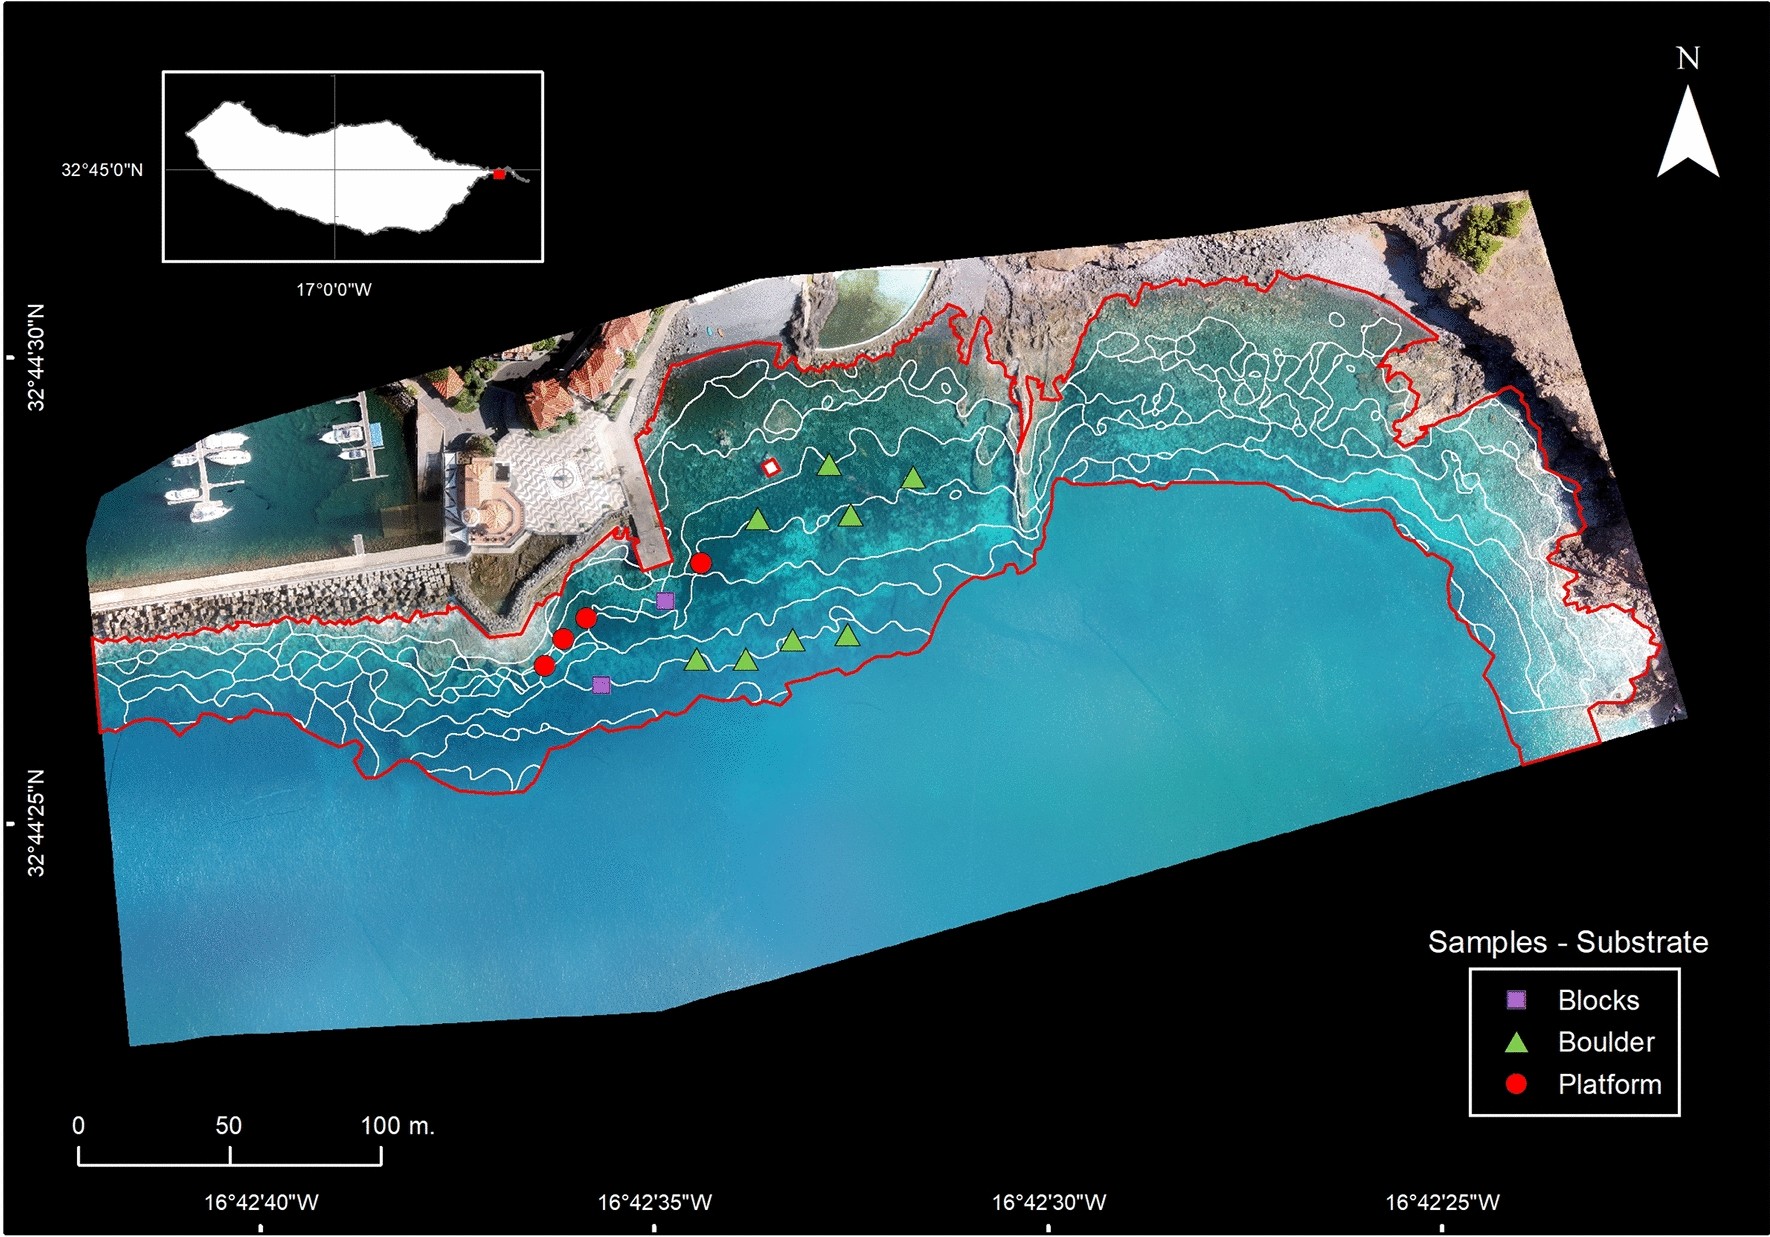 Novel approach to enhance coastal habitat and biotope mapping with drone  aerial imagery analysis | Scientific Reports